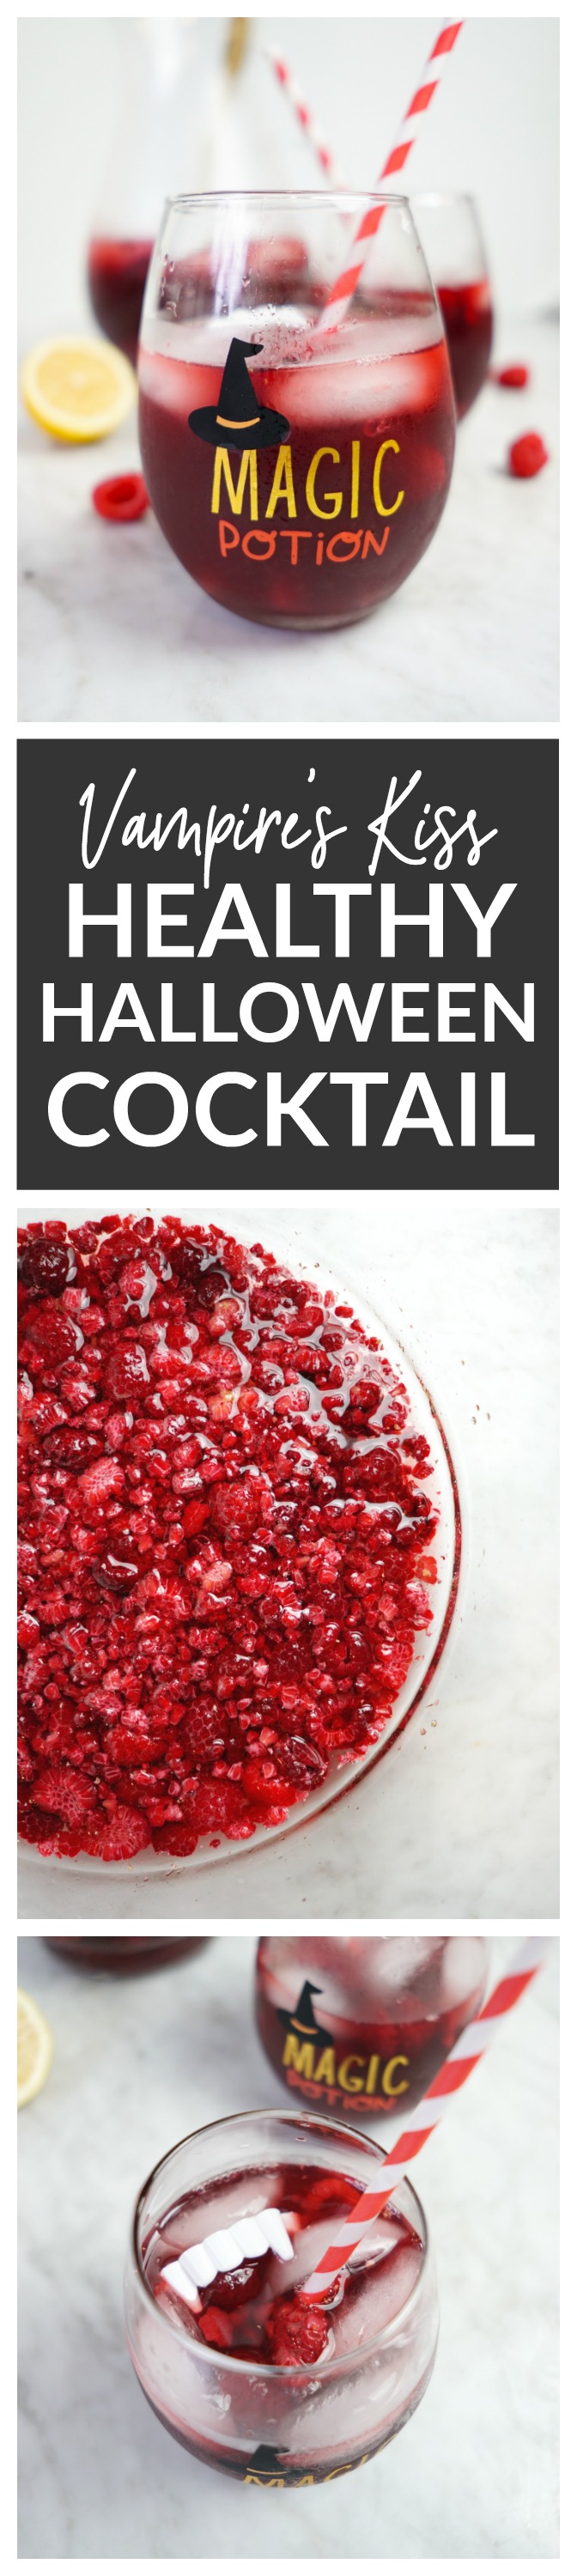 Vampire's Kiss Healthy Halloween Cocktail Recipe - made with frozen raspberries and fresh pomegranate juice